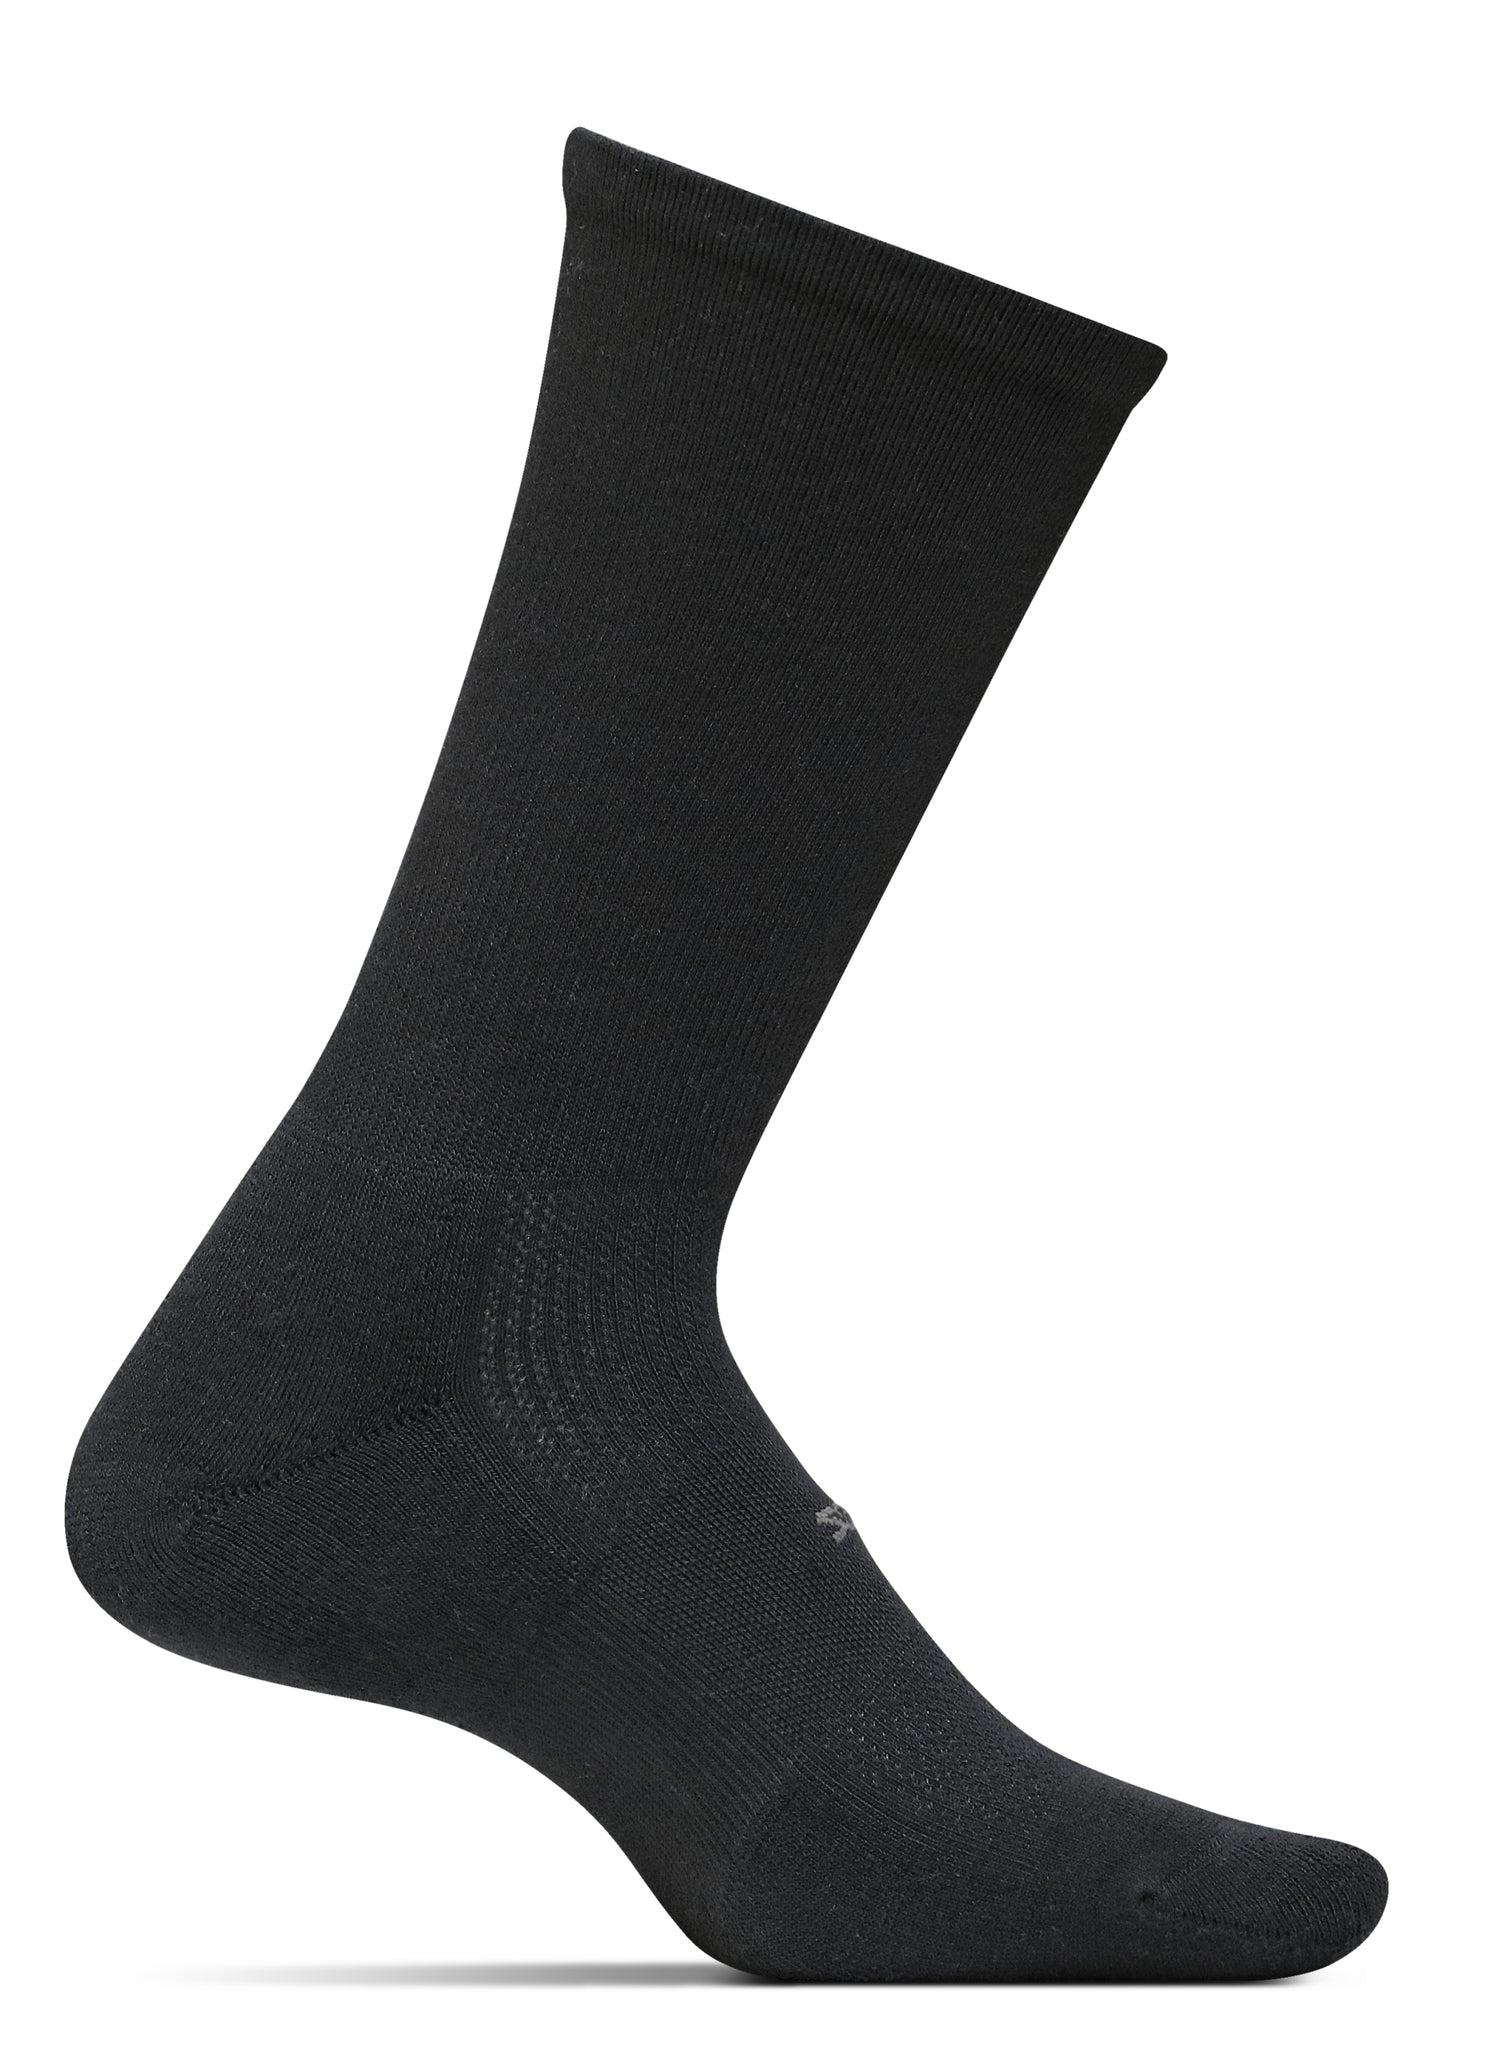 Medial view of the Feetures High Performance Cushion crew sock in the color black